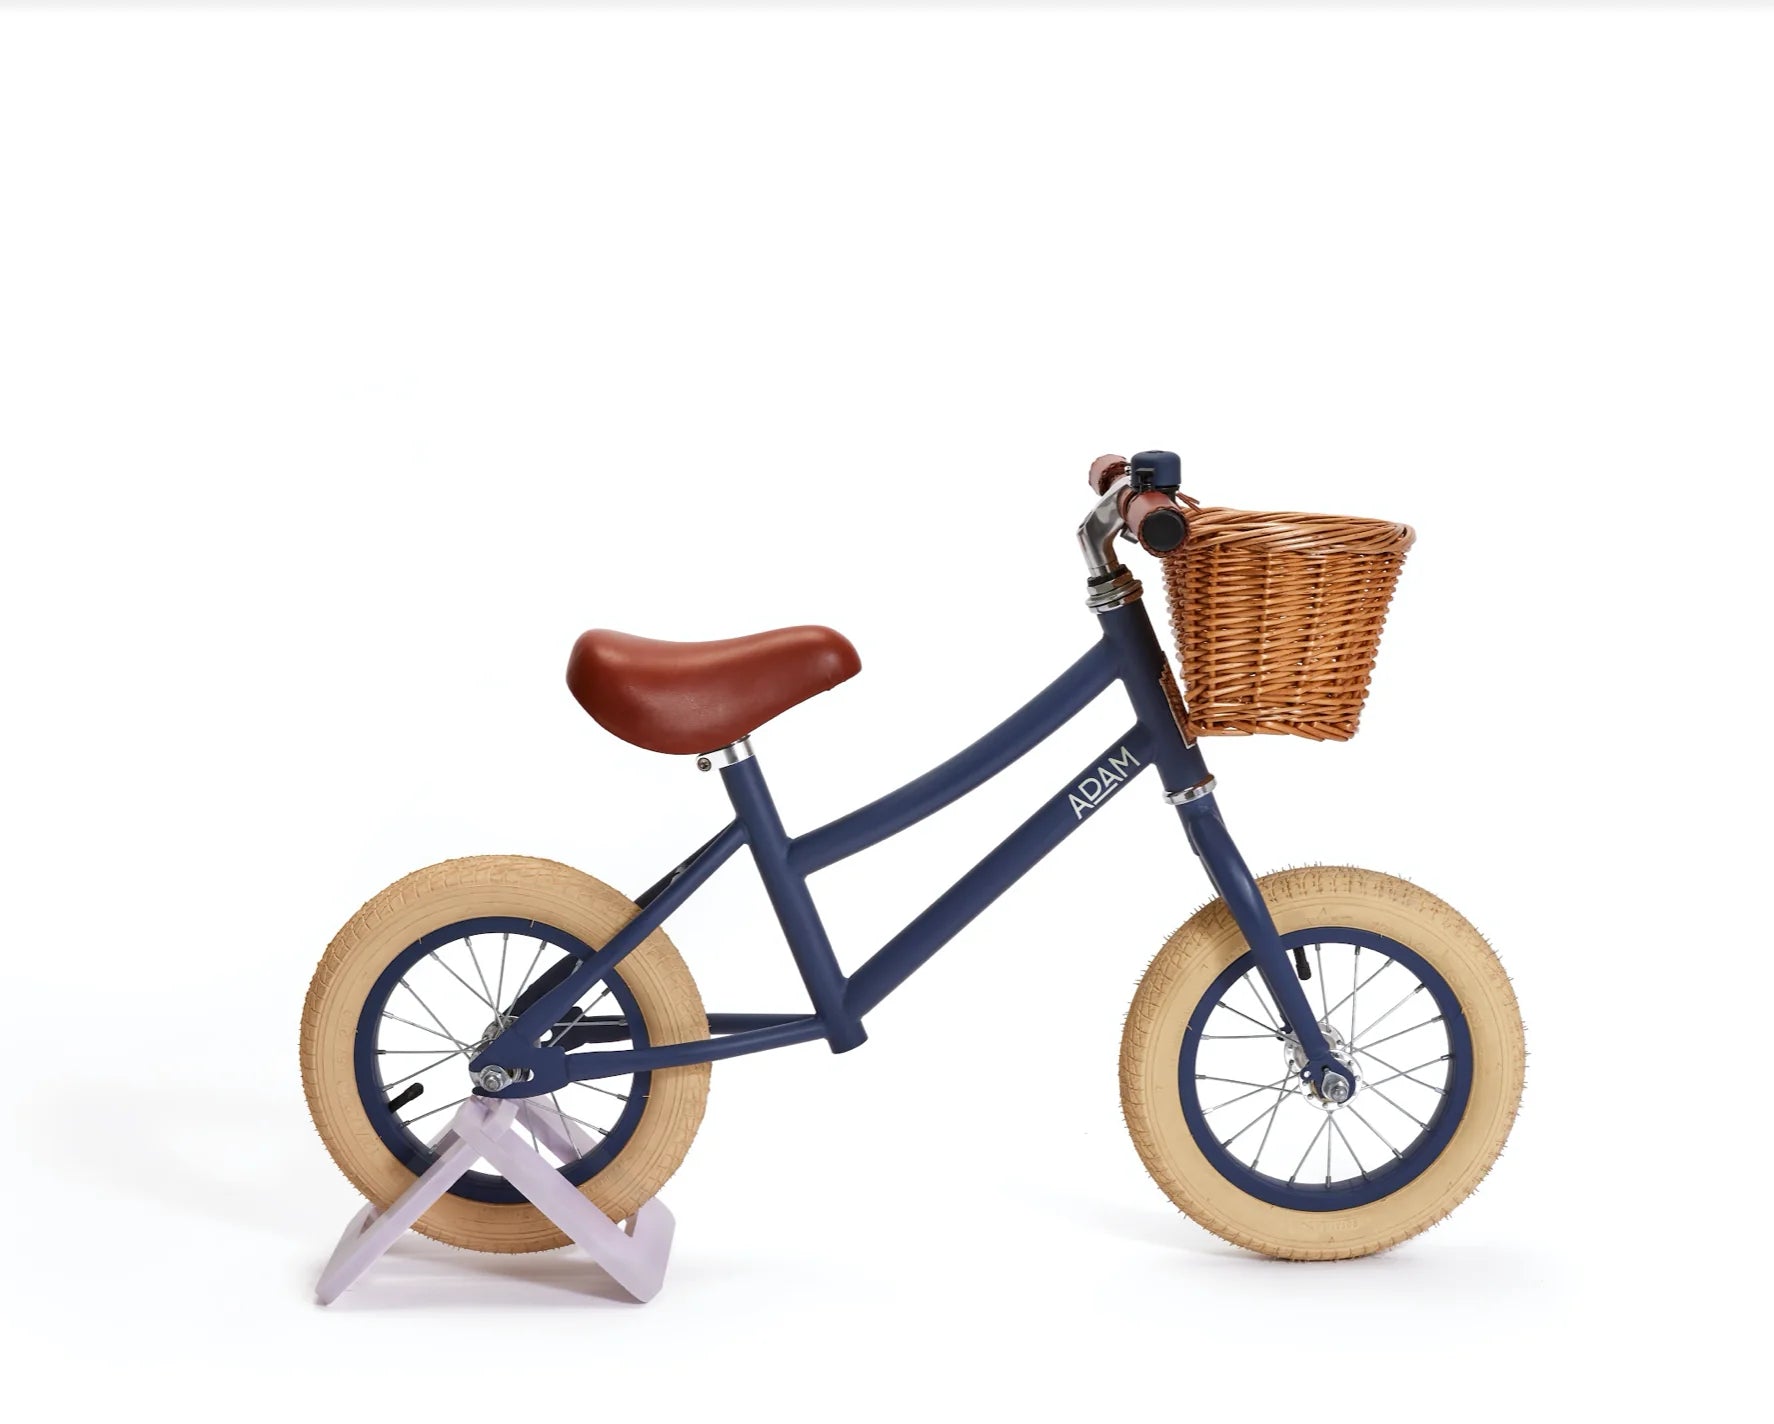 The Little Adam 12" - Balance bike for toddlers